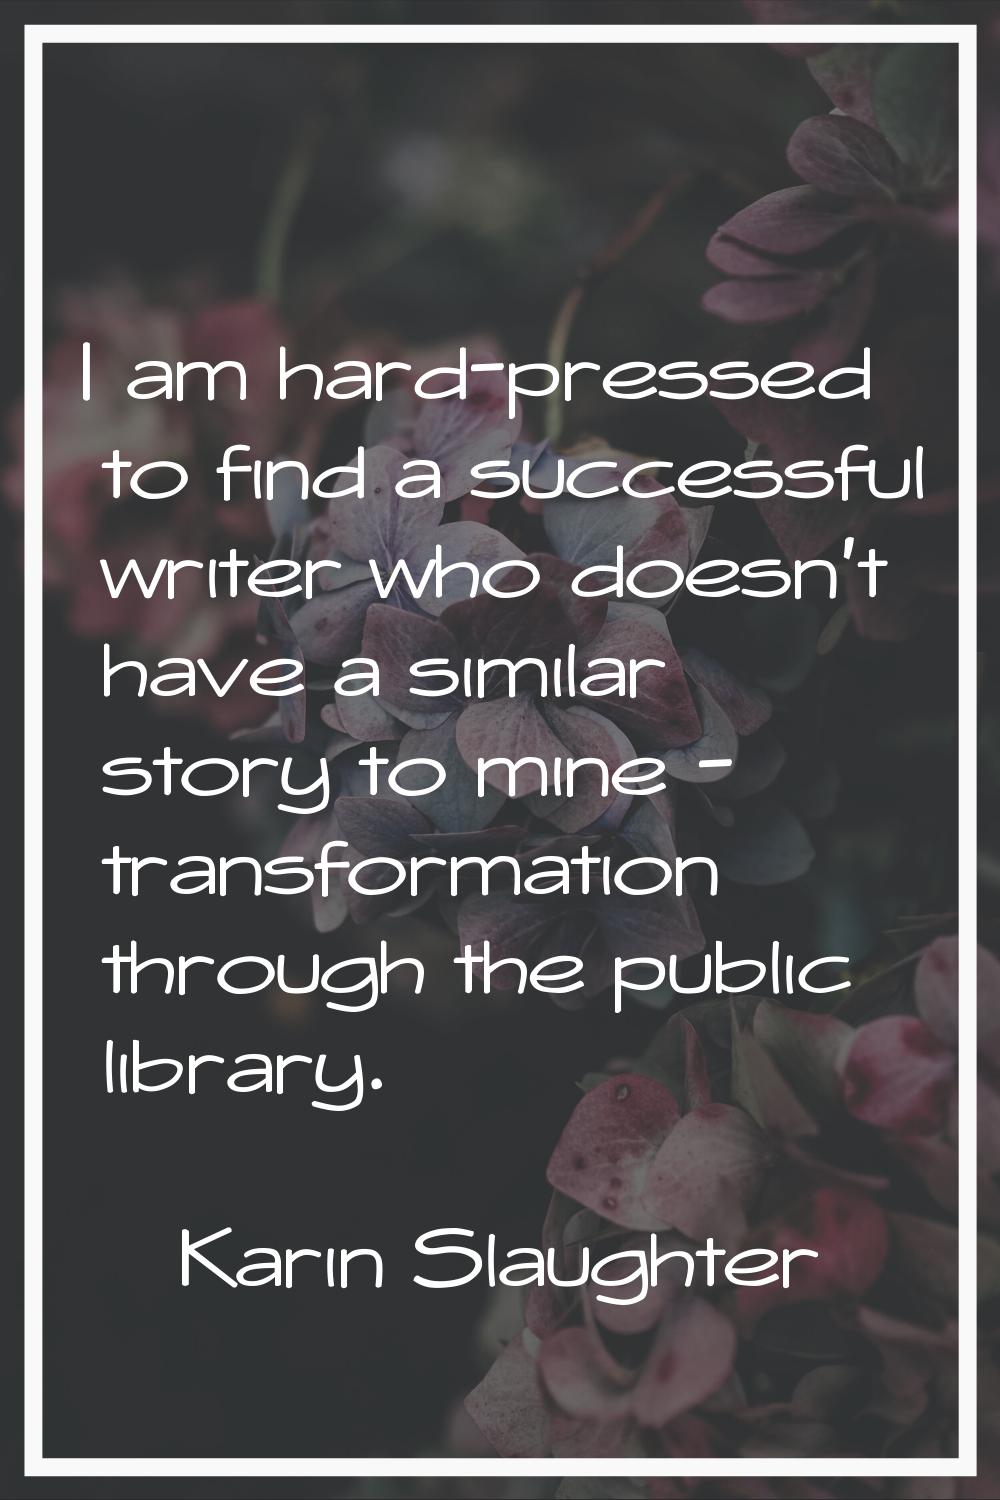 I am hard-pressed to find a successful writer who doesn't have a similar story to mine - transforma